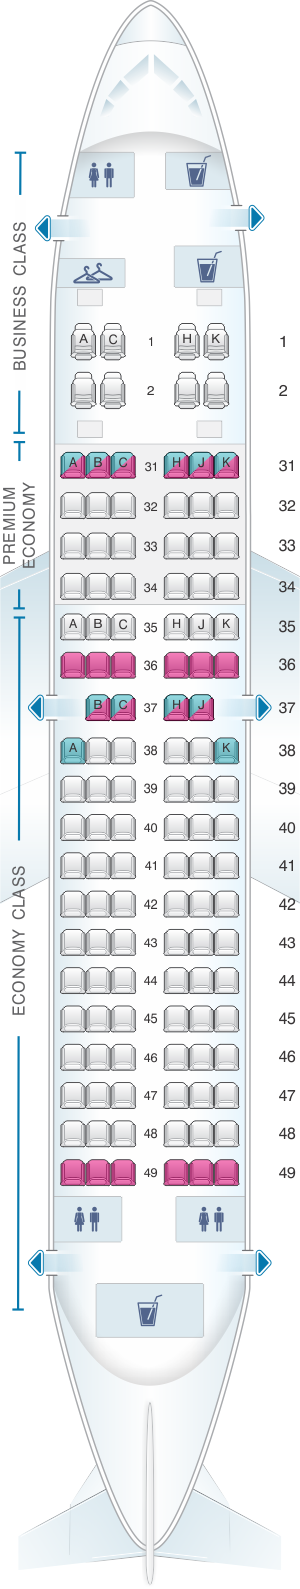 Seat map for China Southern Airlines Boeing B737 700